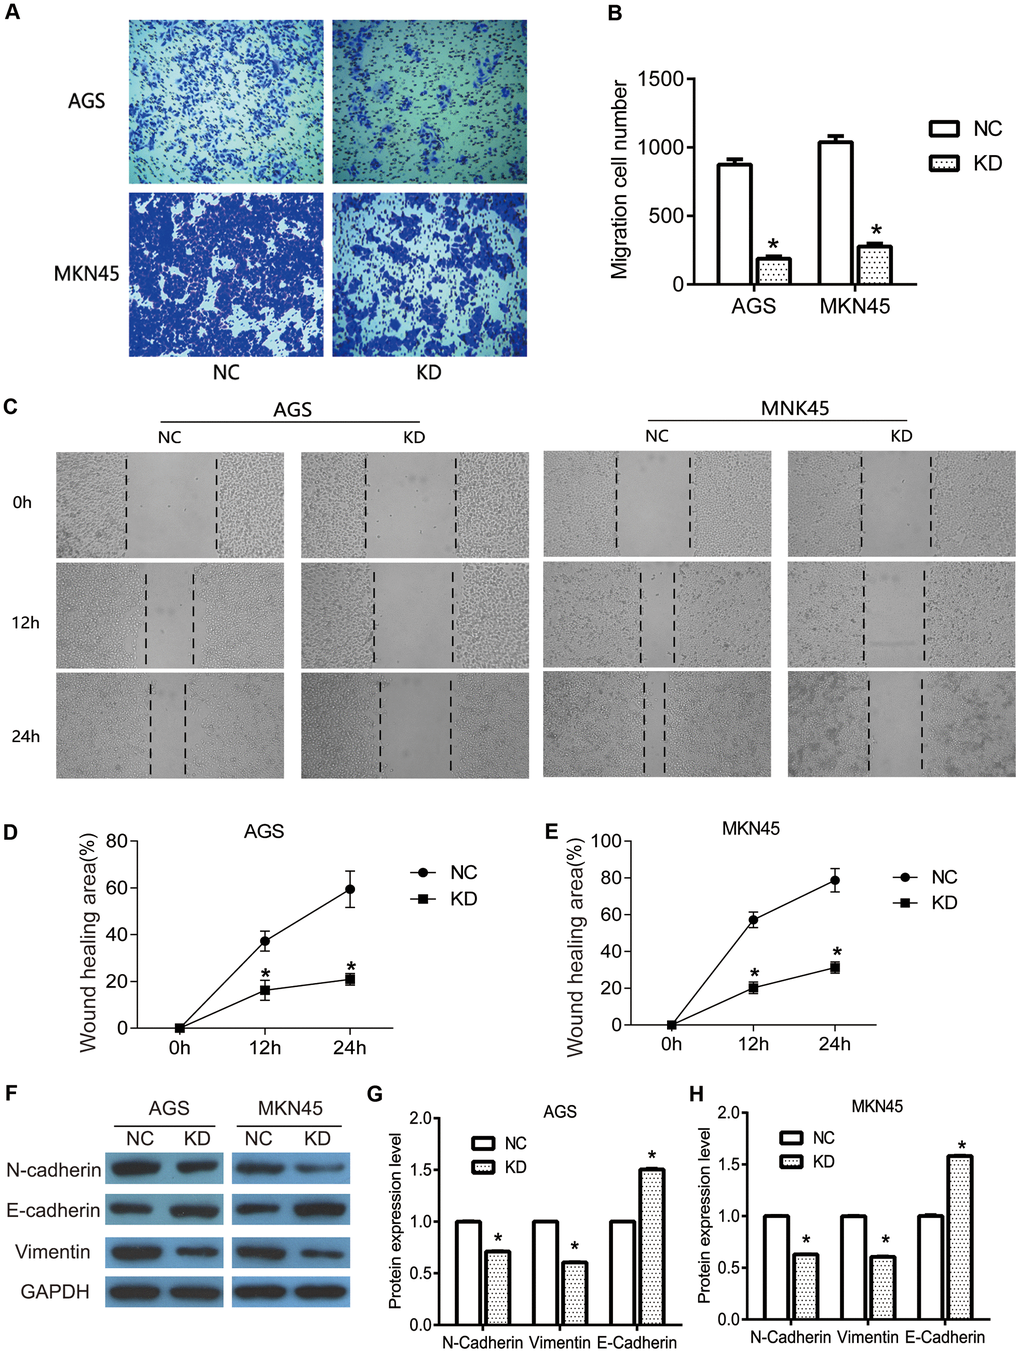 The knockdown of OGFRP1 inhibited the migration in human gastric cancer cells. (A) The migrations of AGS and MKN45 cells with the transfection of control siRNA or OGFRP1 specific-siRNA were evaluated by transwell. (B) Statistical analysis of migration cell number was performed using the t-test. (C) Wound healing assay was performed to further confirm the migration of AGS and MKN45 cells. The healing speed of scratches was calculated by healing area after scratching for 48 h/ total scratch area. (D) Statistical analysis of AGS cells was performed using the t-test. (E) Statistical analysis of MKN45 cells was performed using the t-test. (F) The expressions of migration-related proteins were determined using western blot. Statistical analyses of protein expression levels in AGS (G) and MKN45 (H) cells were performed using the t-test. *P